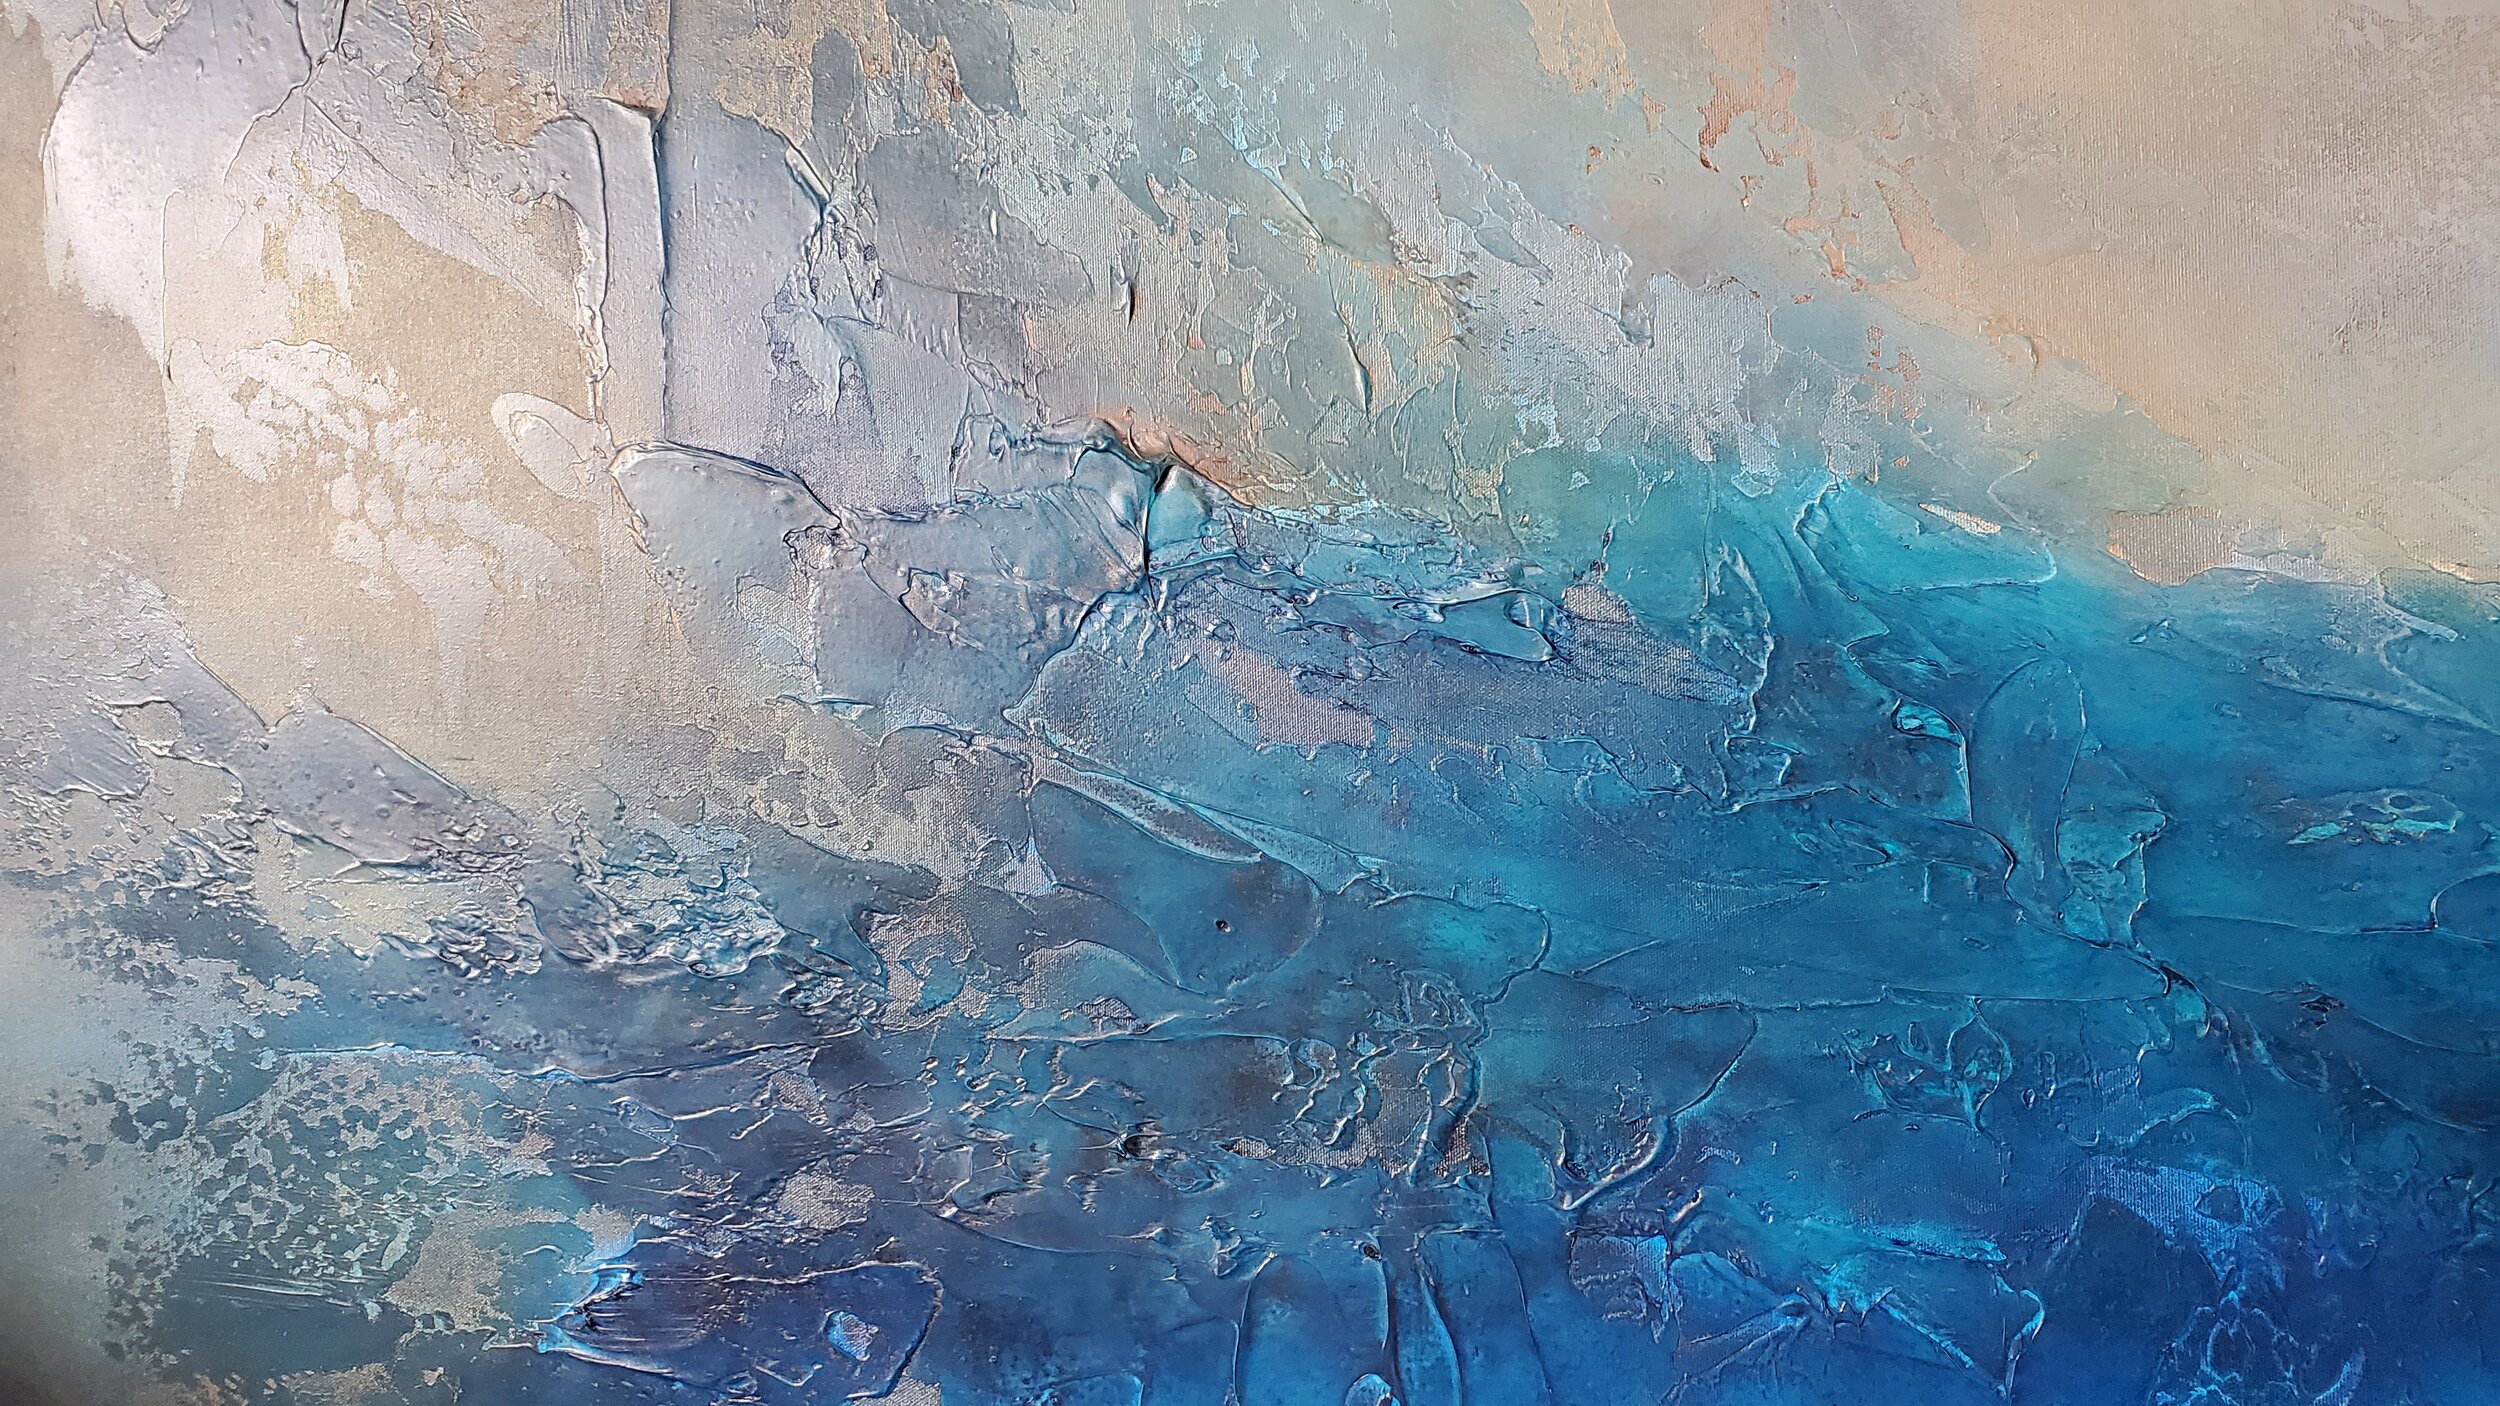  Painting #2 Unknown- Vancouver abstract painter, Donna Giraud has eleven new available artworks for sale in her 2020 solo art exhibition titled, Lost and Found. Her large scale, abstract, textural artworks are perfect for any interior design aesthet